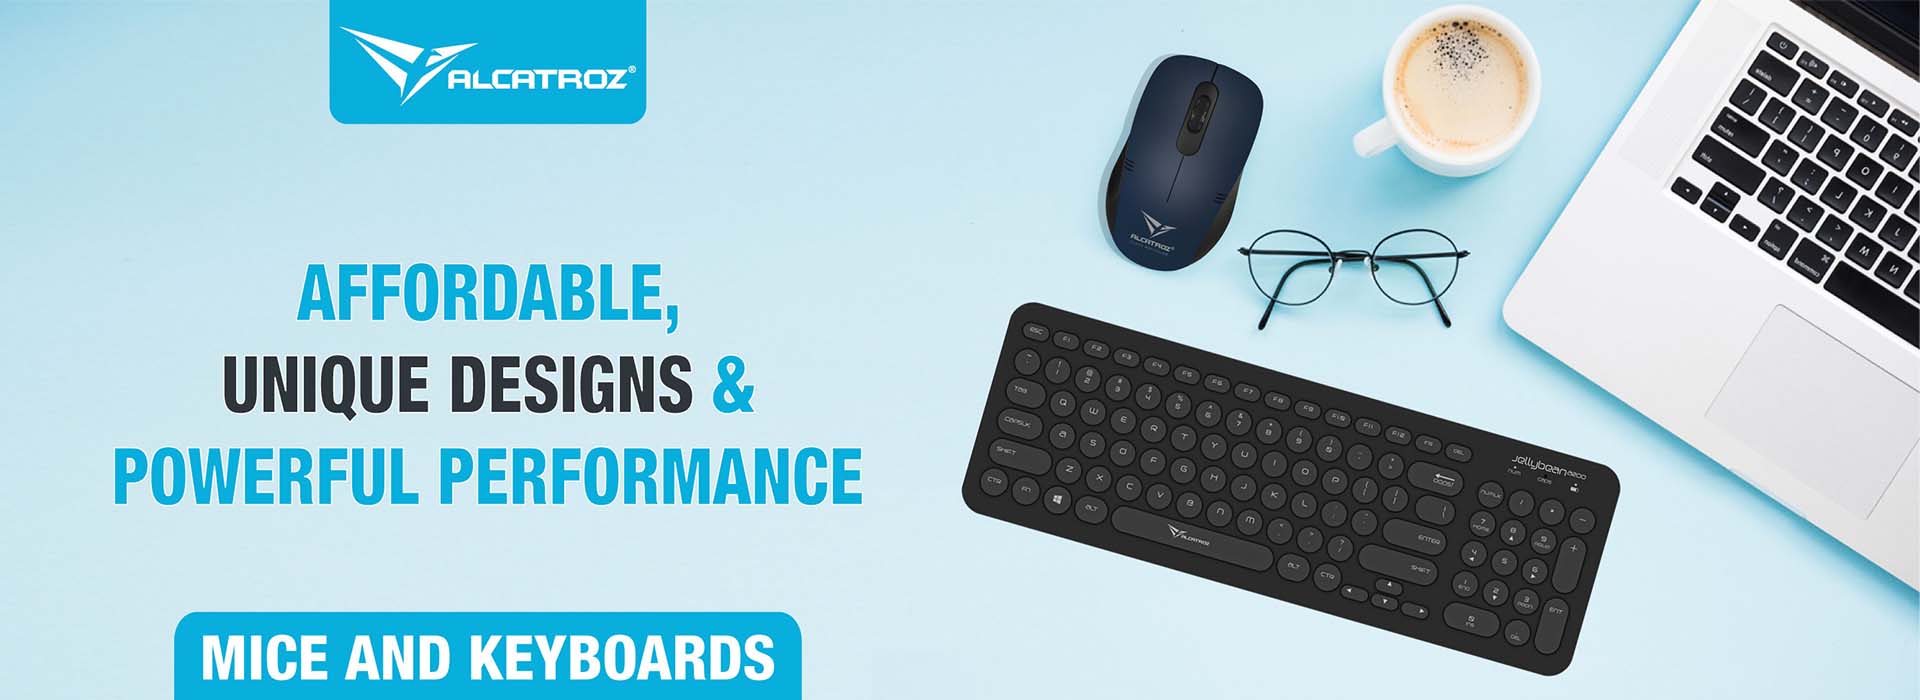 Alcatroz Mouse and Keyboard